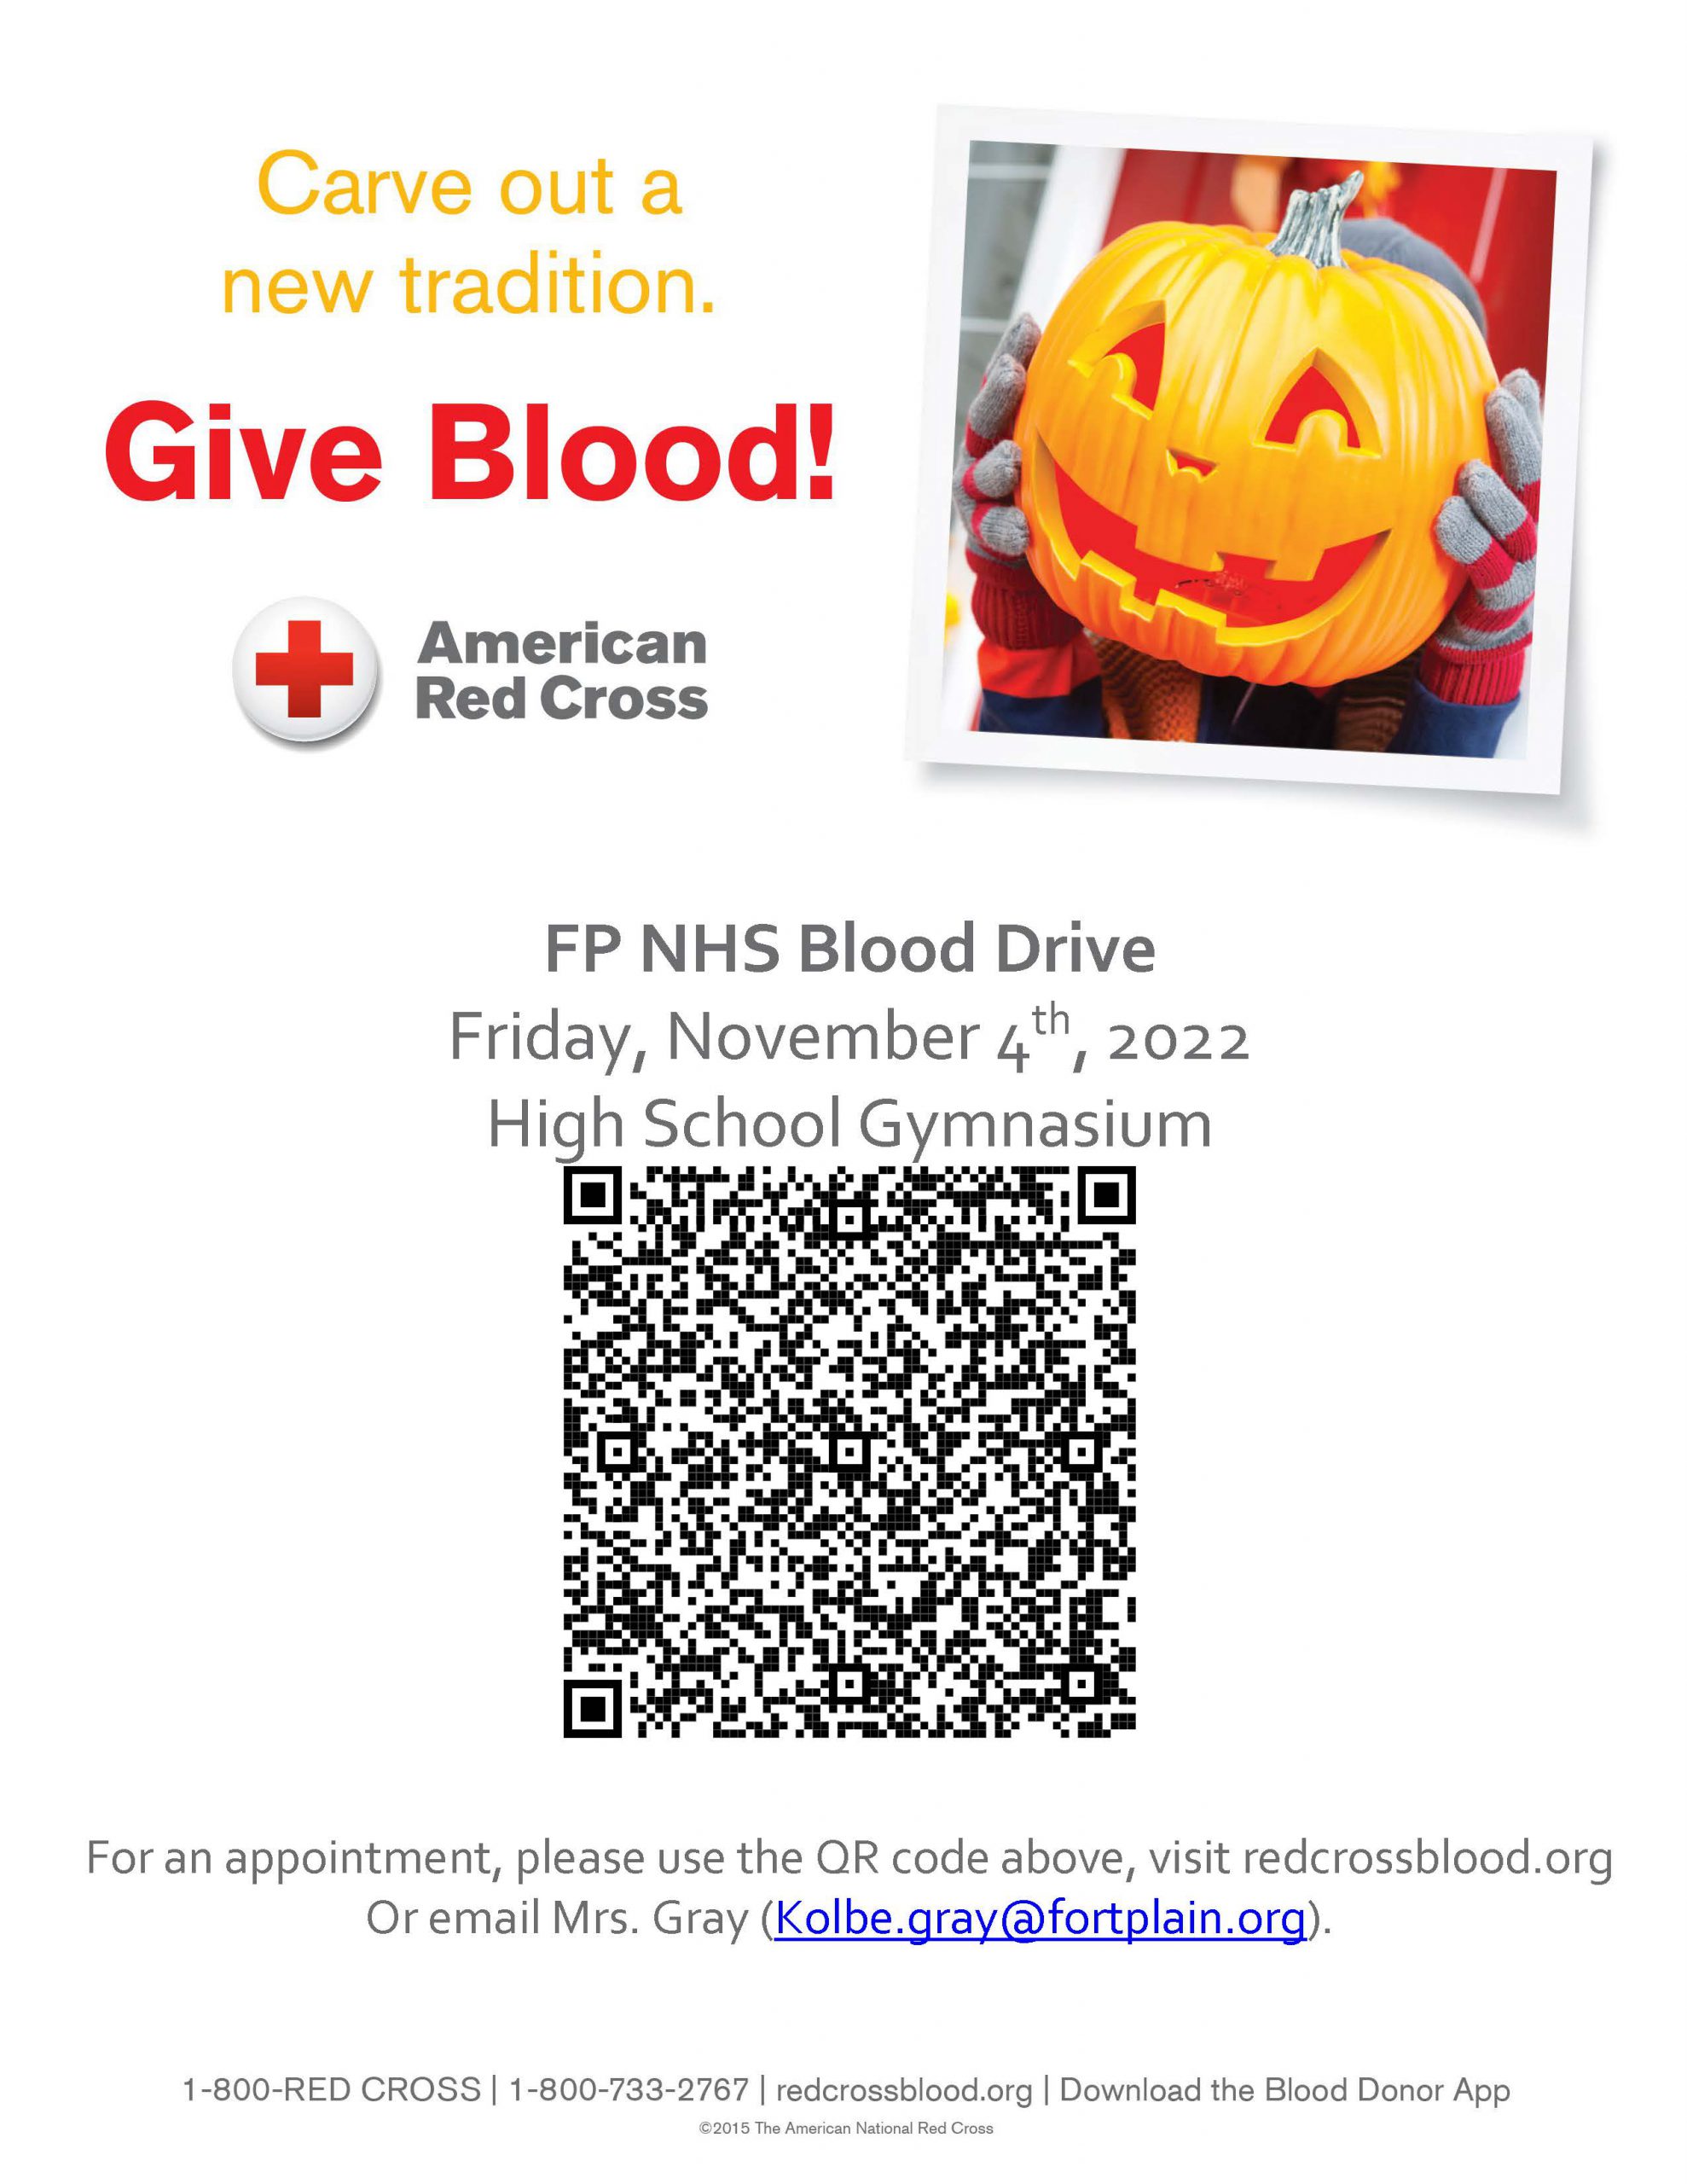 blood drive flier with QR code and information that is in the text above